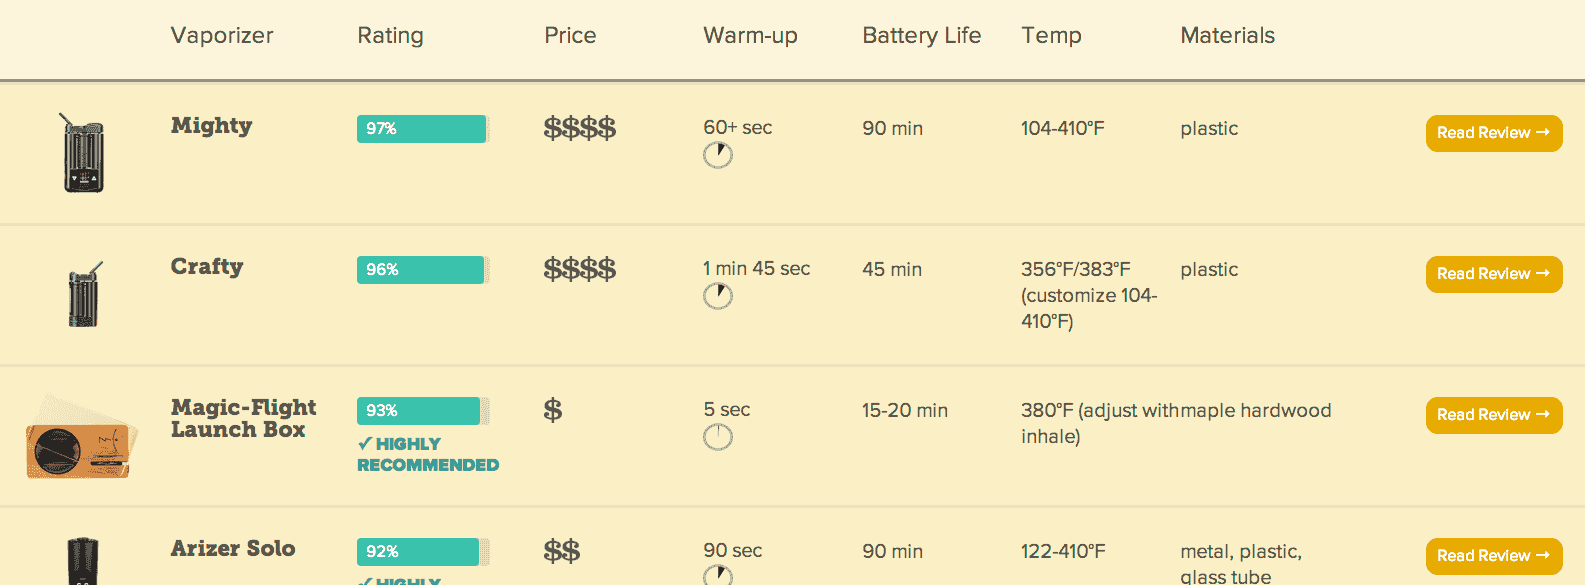 Comparison chart of vaporizer stats: compare battery life, price, charge time, etc.